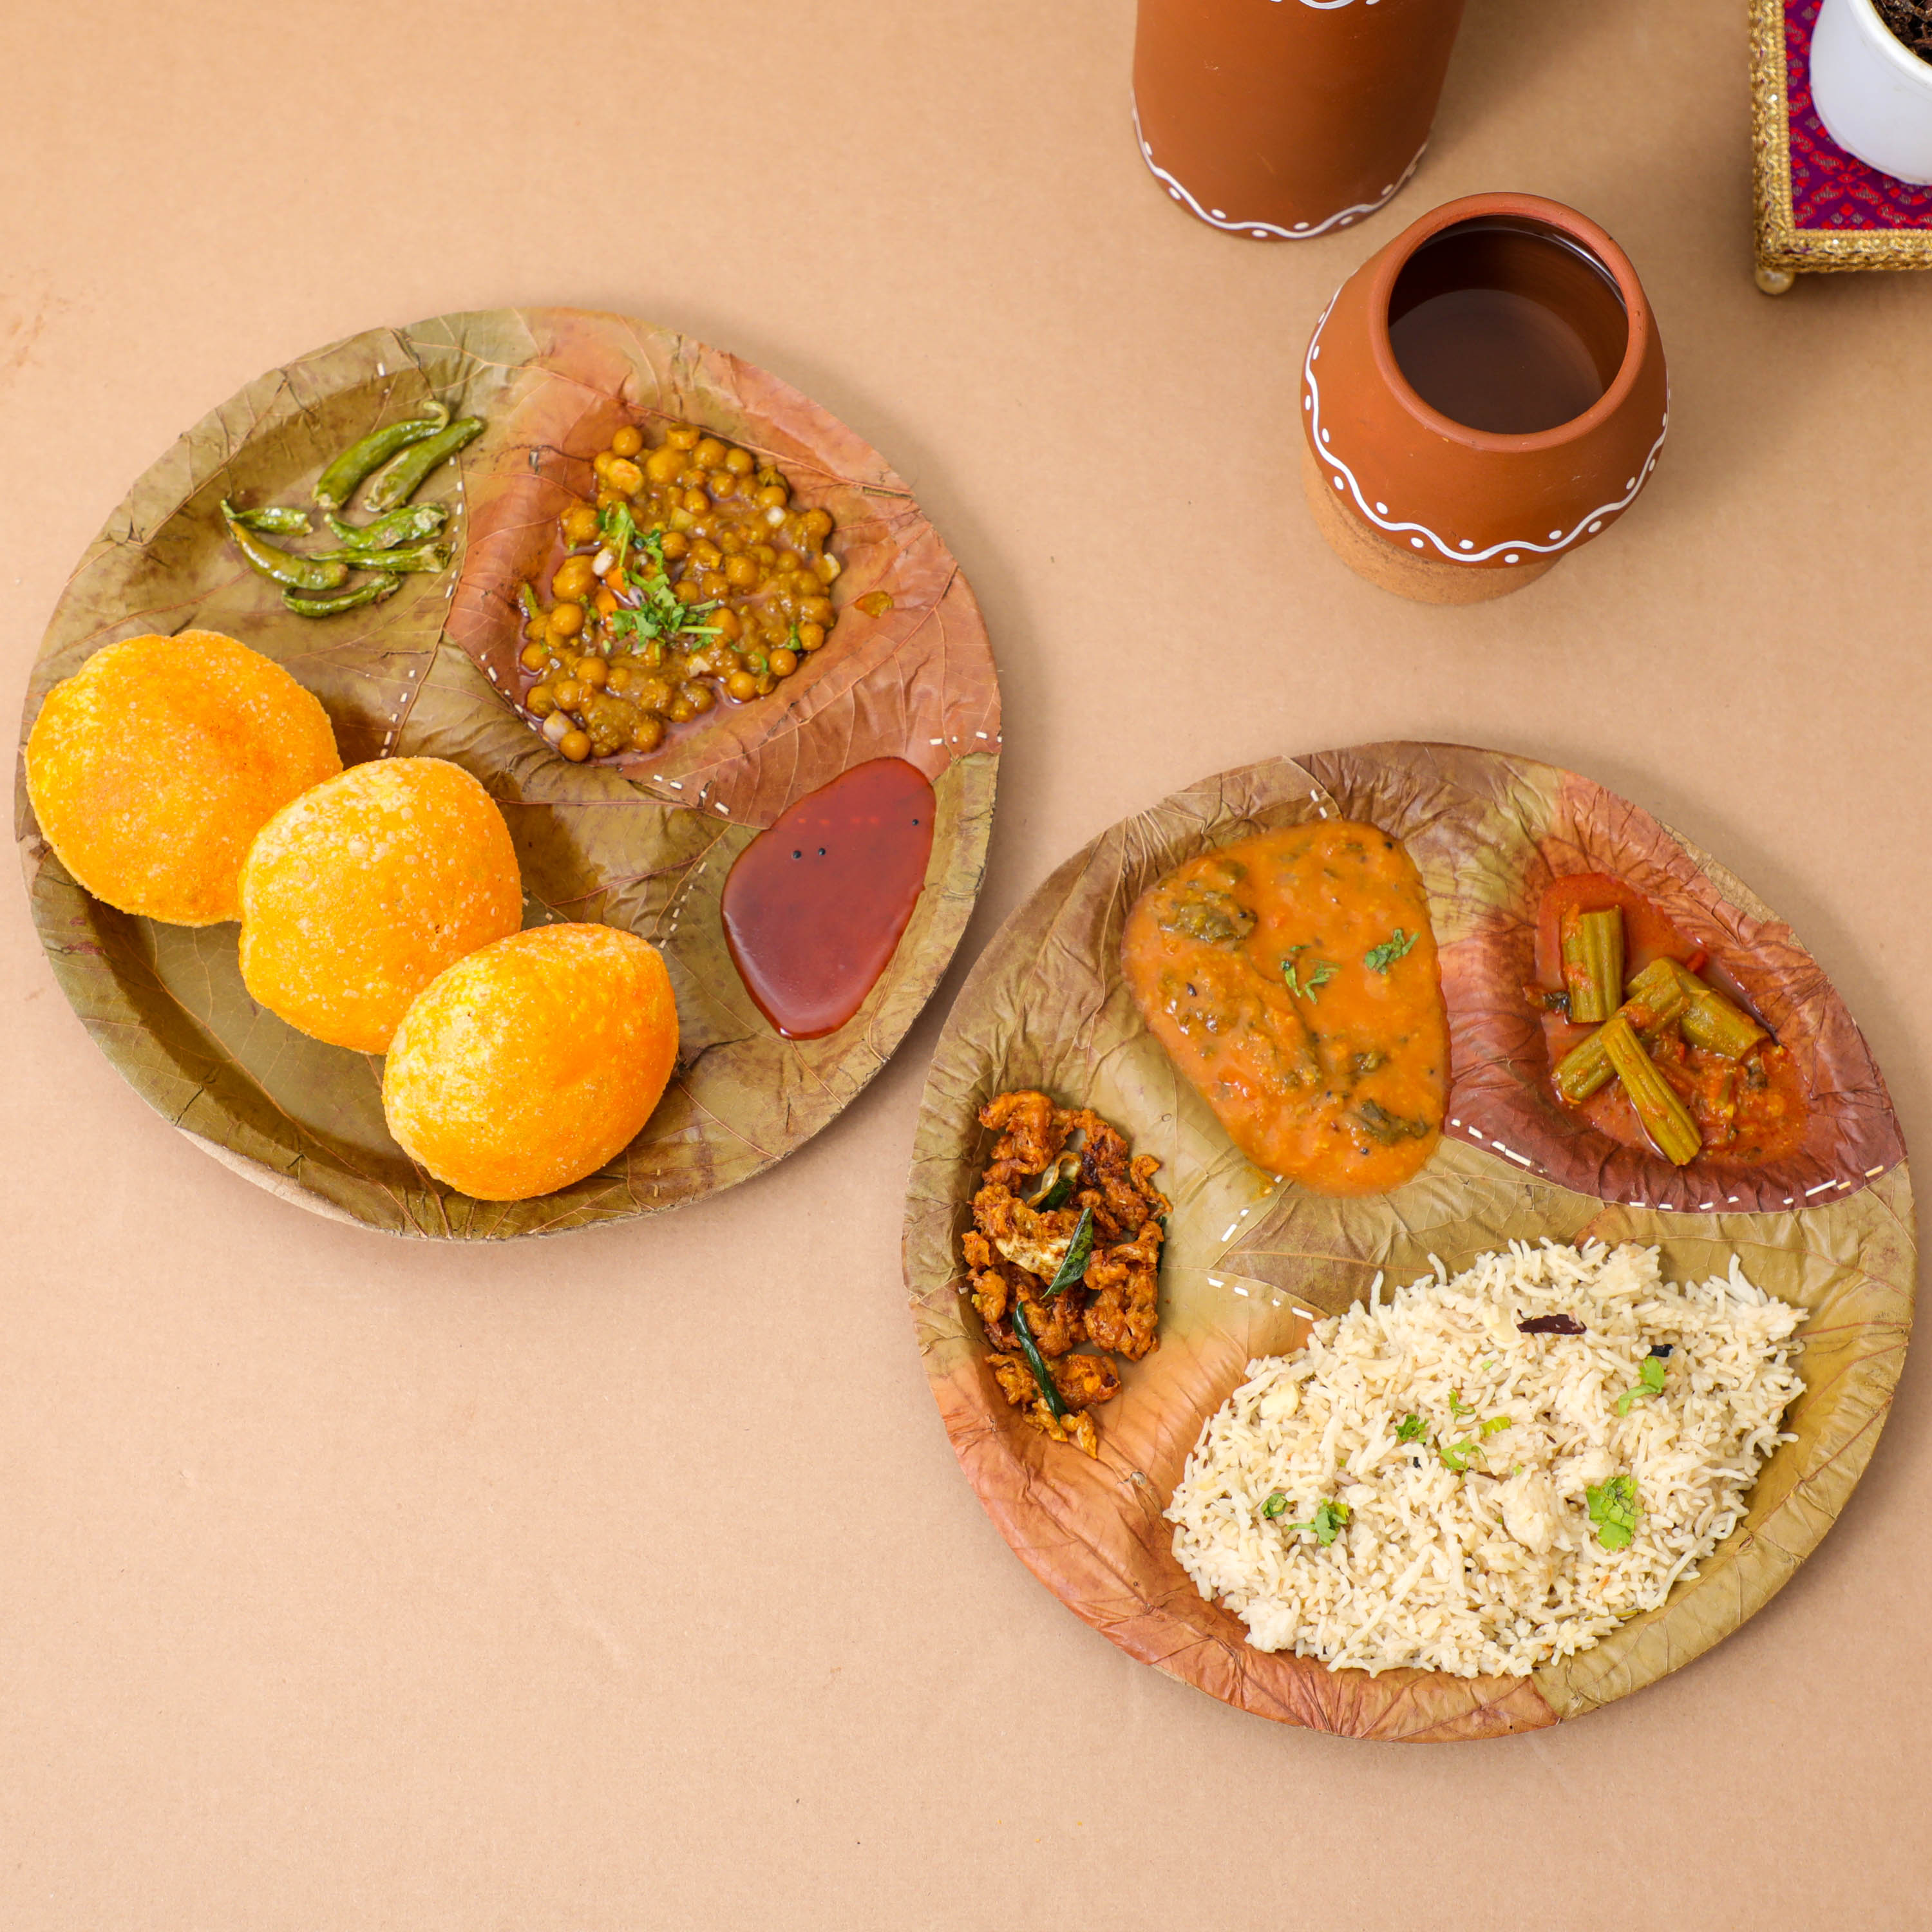 12 Biodegradable Disposable Plates - Made in India